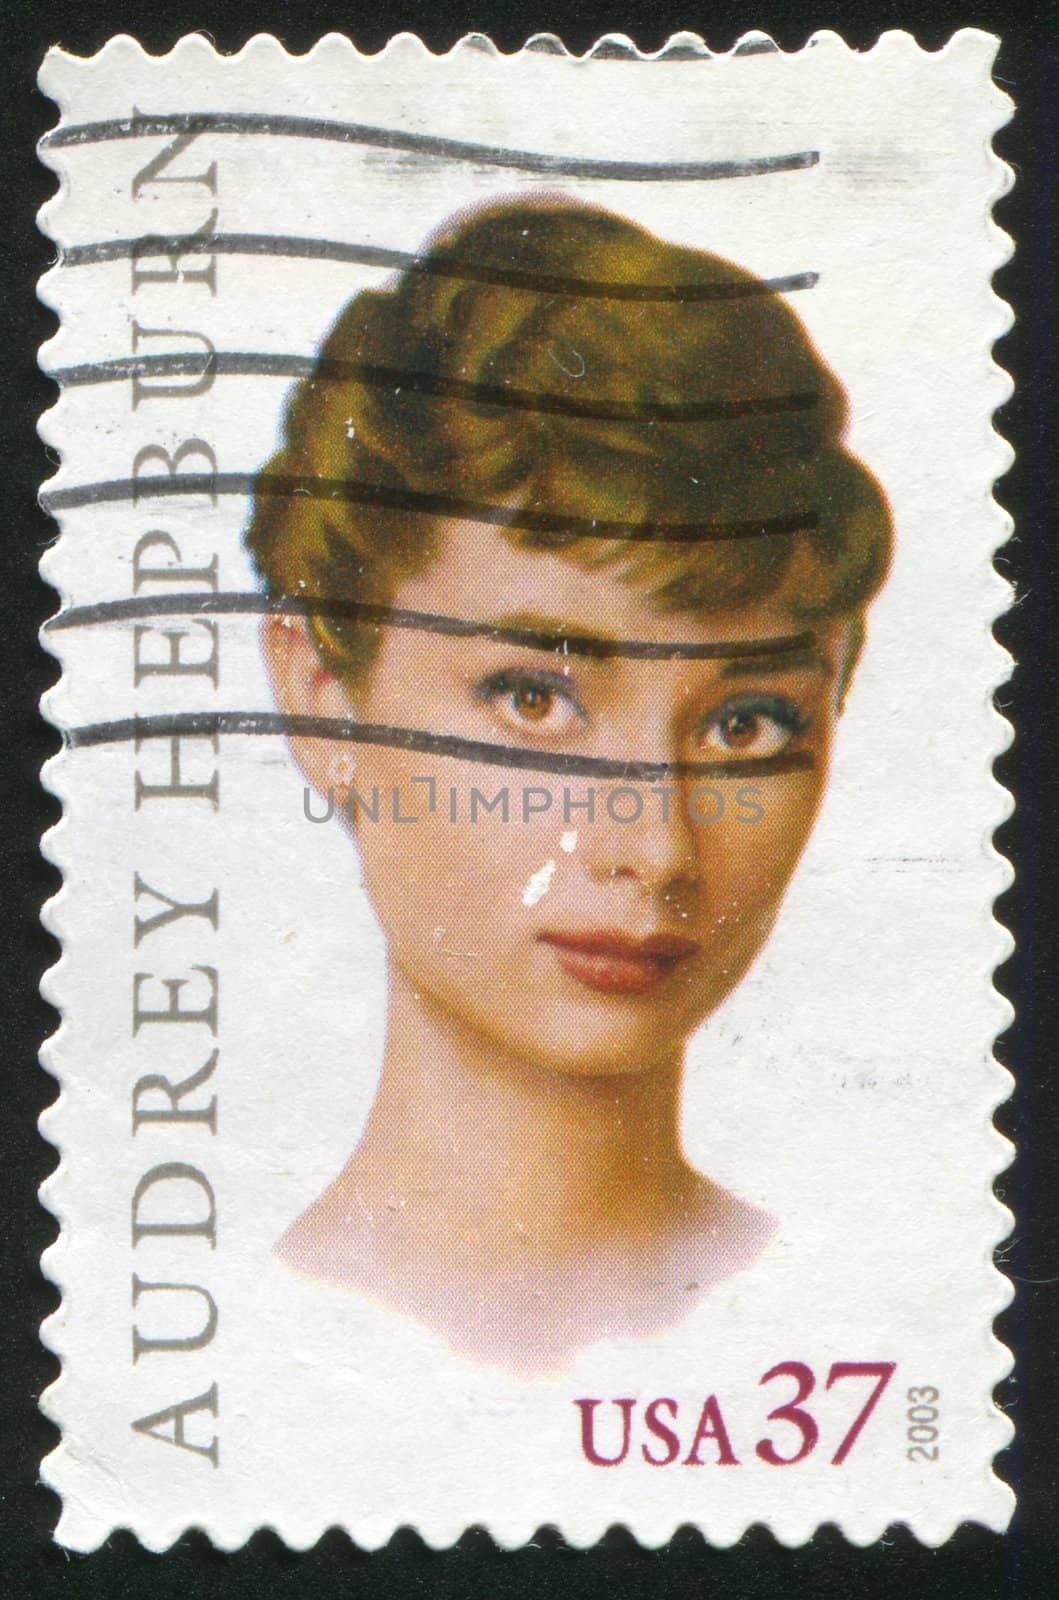 UNITED STATES - CIRCA 2003: stamp printed by United states, shows Audrey Hepburn, circa 2003